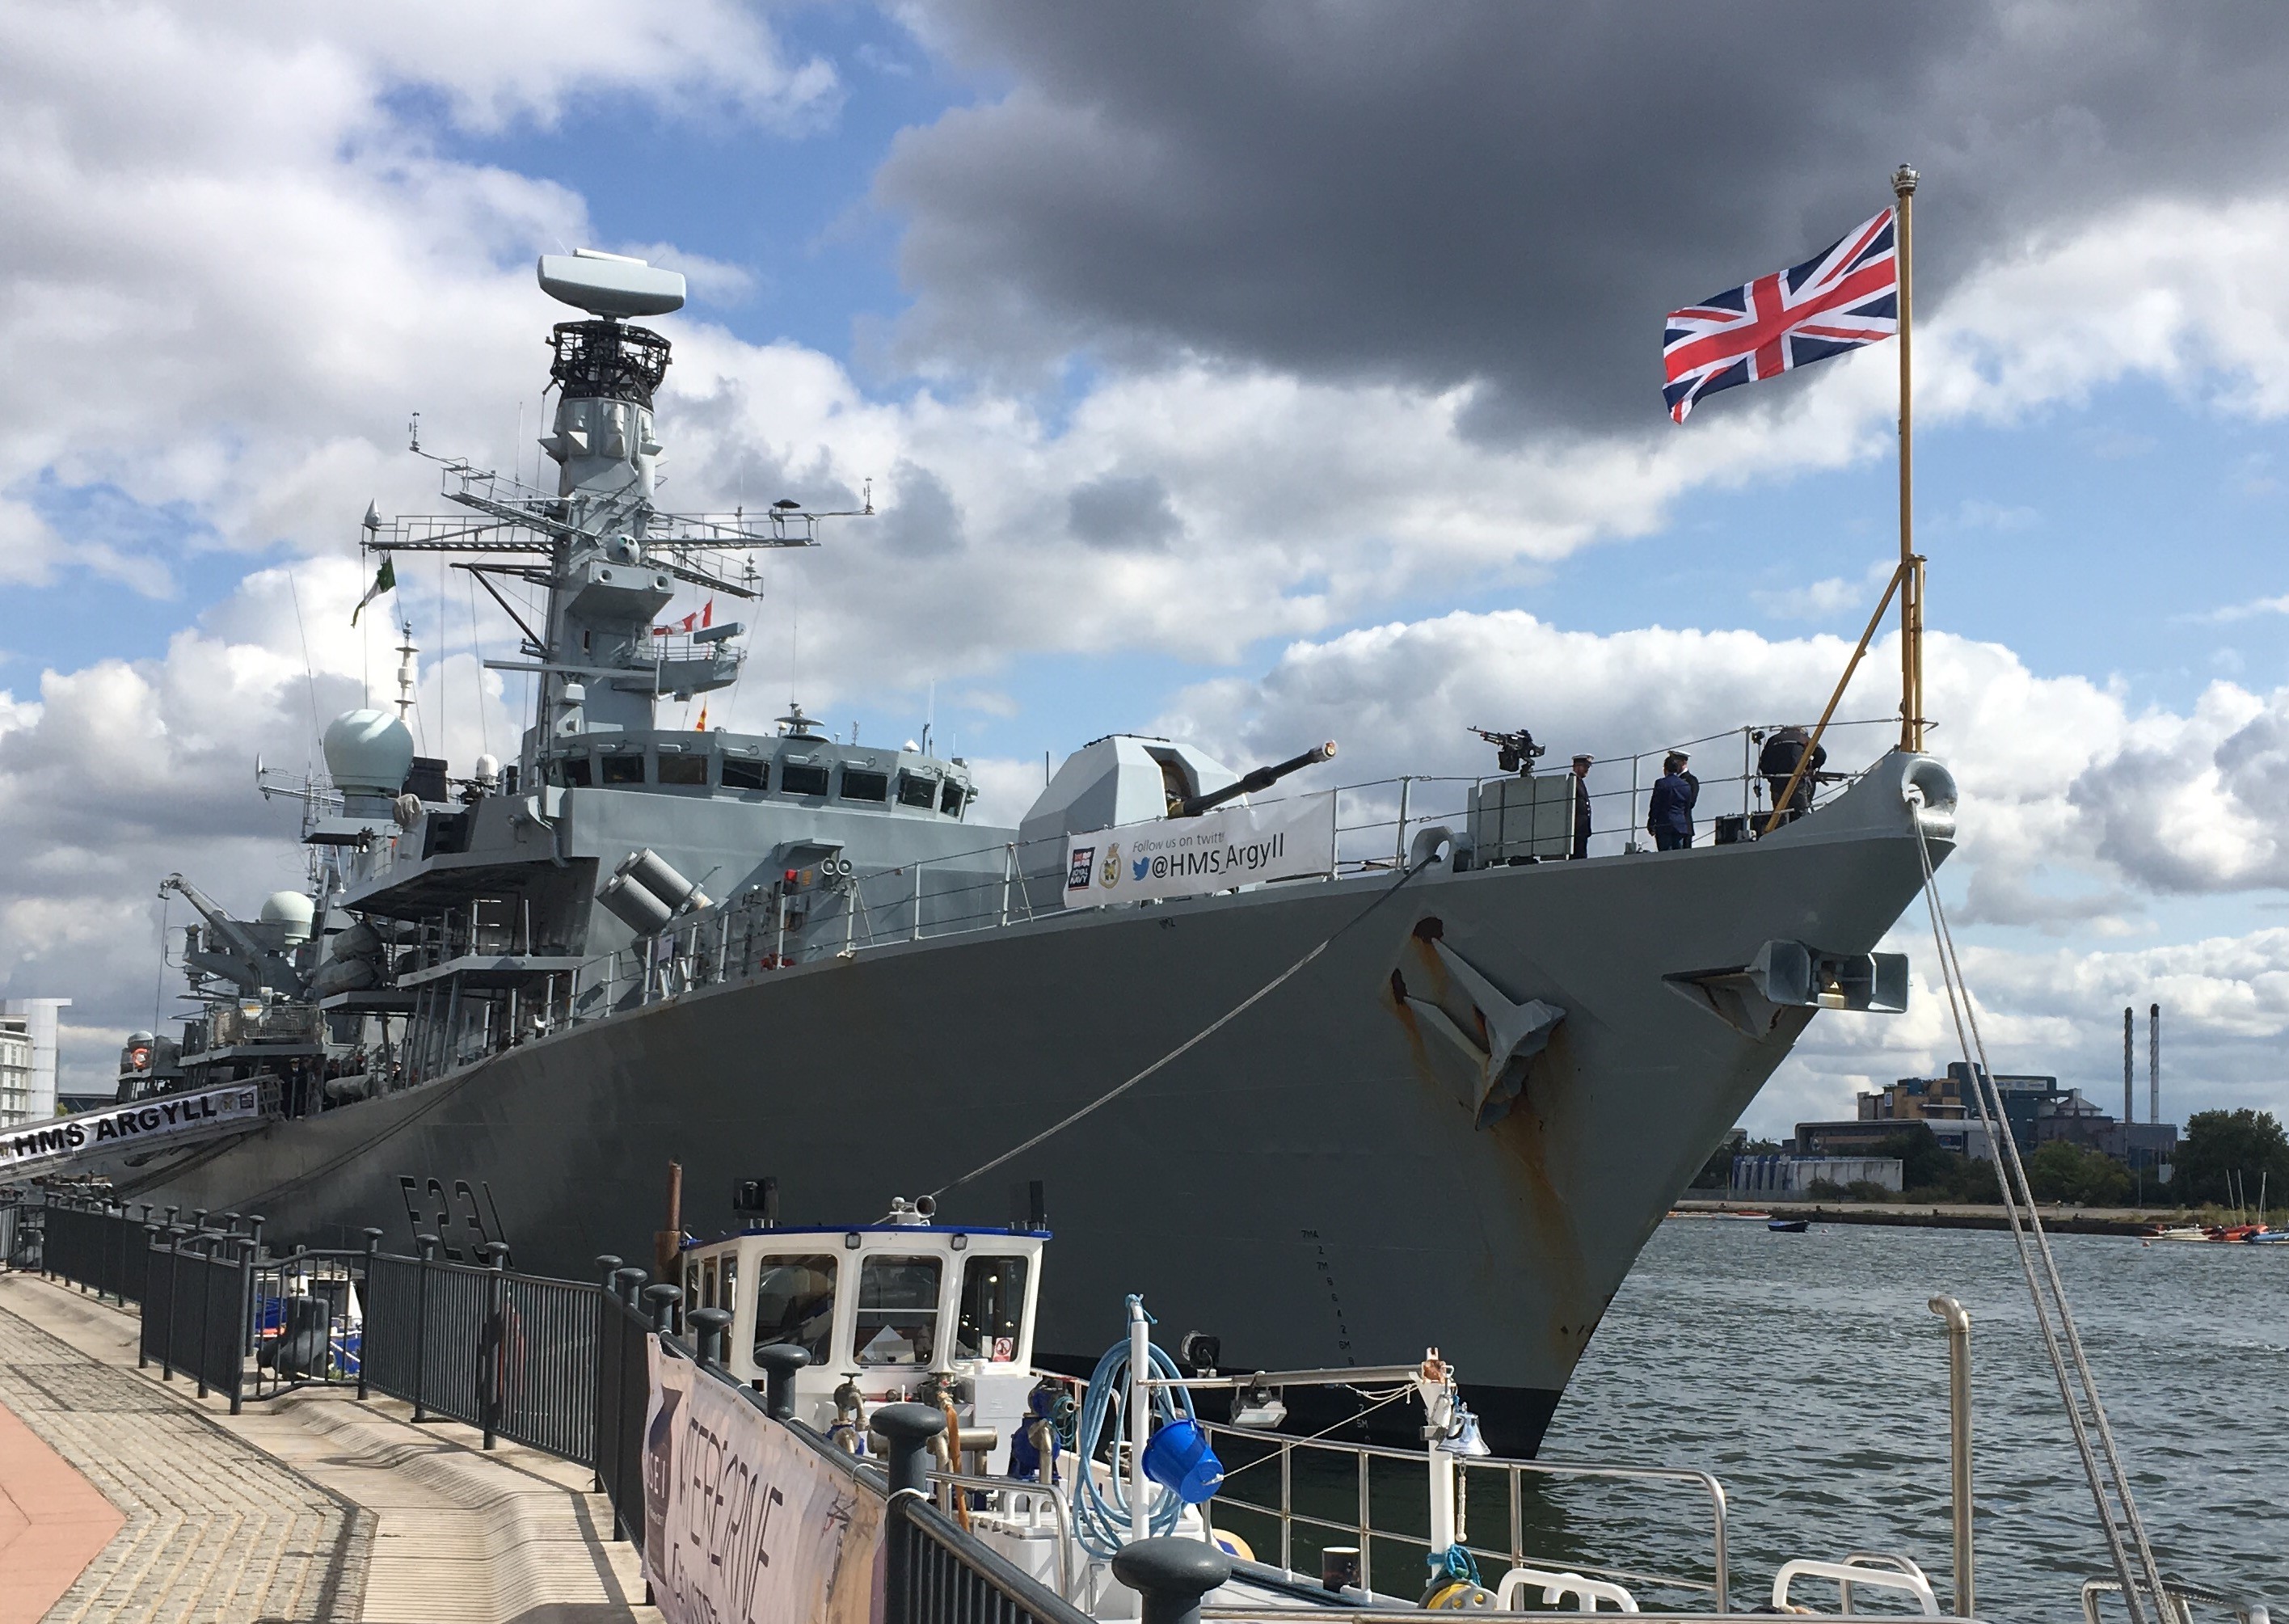 The Royal Navy's oldest ship has a new mission as the UK looks to